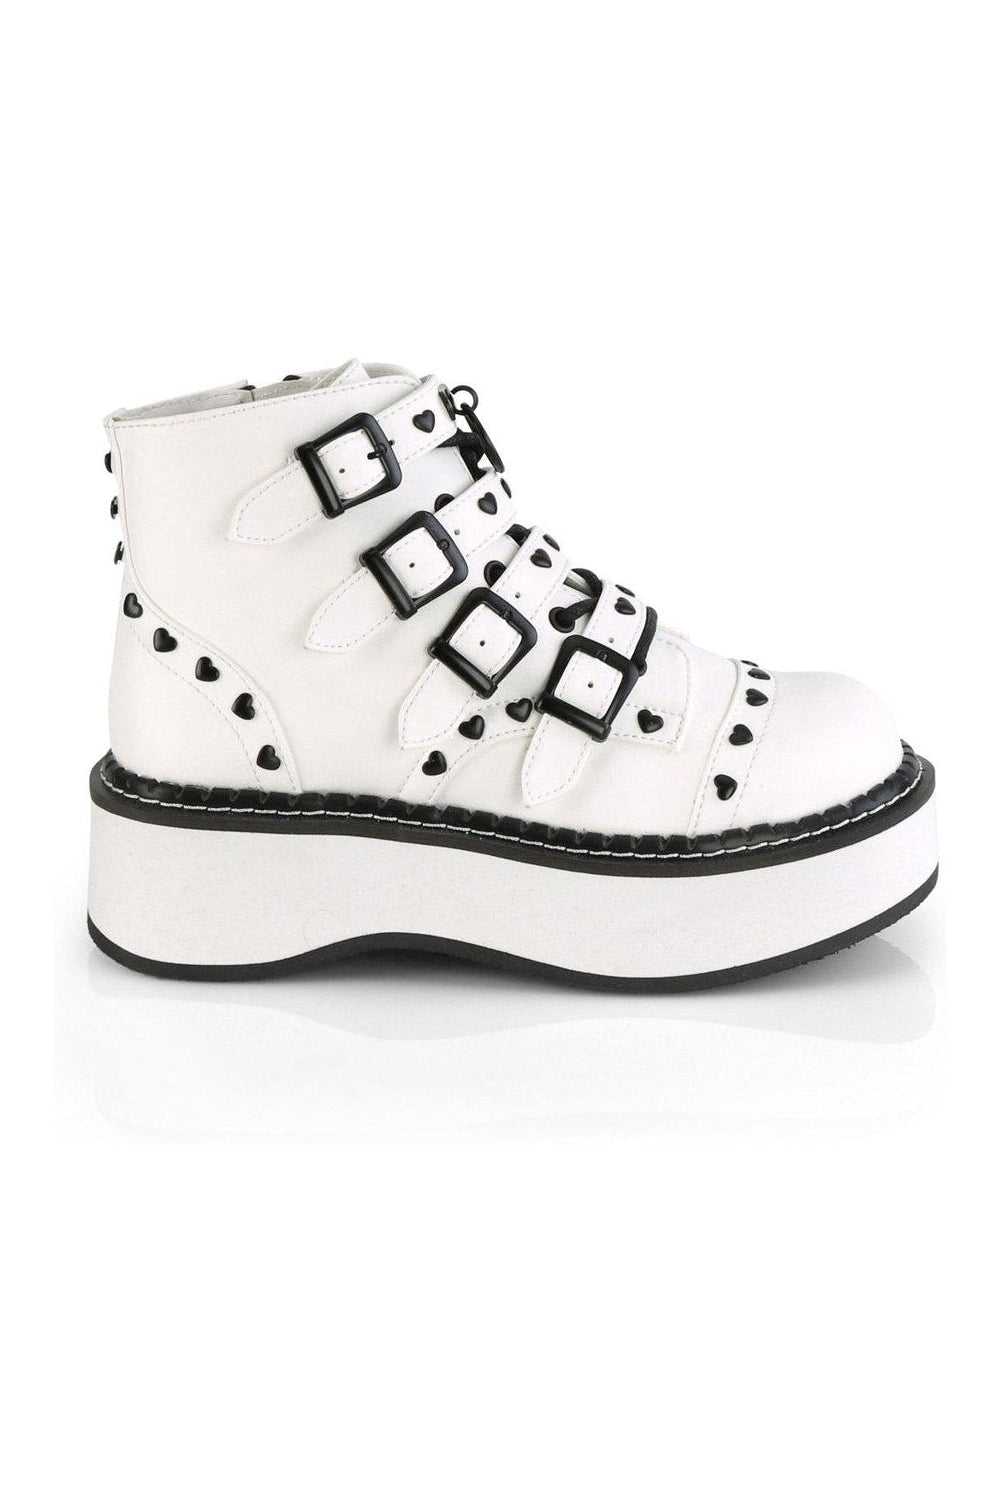 EMILY-315 Ankle Boot | White Faux Leather-Ankle Boots-Demonia-SEXYSHOES.COM